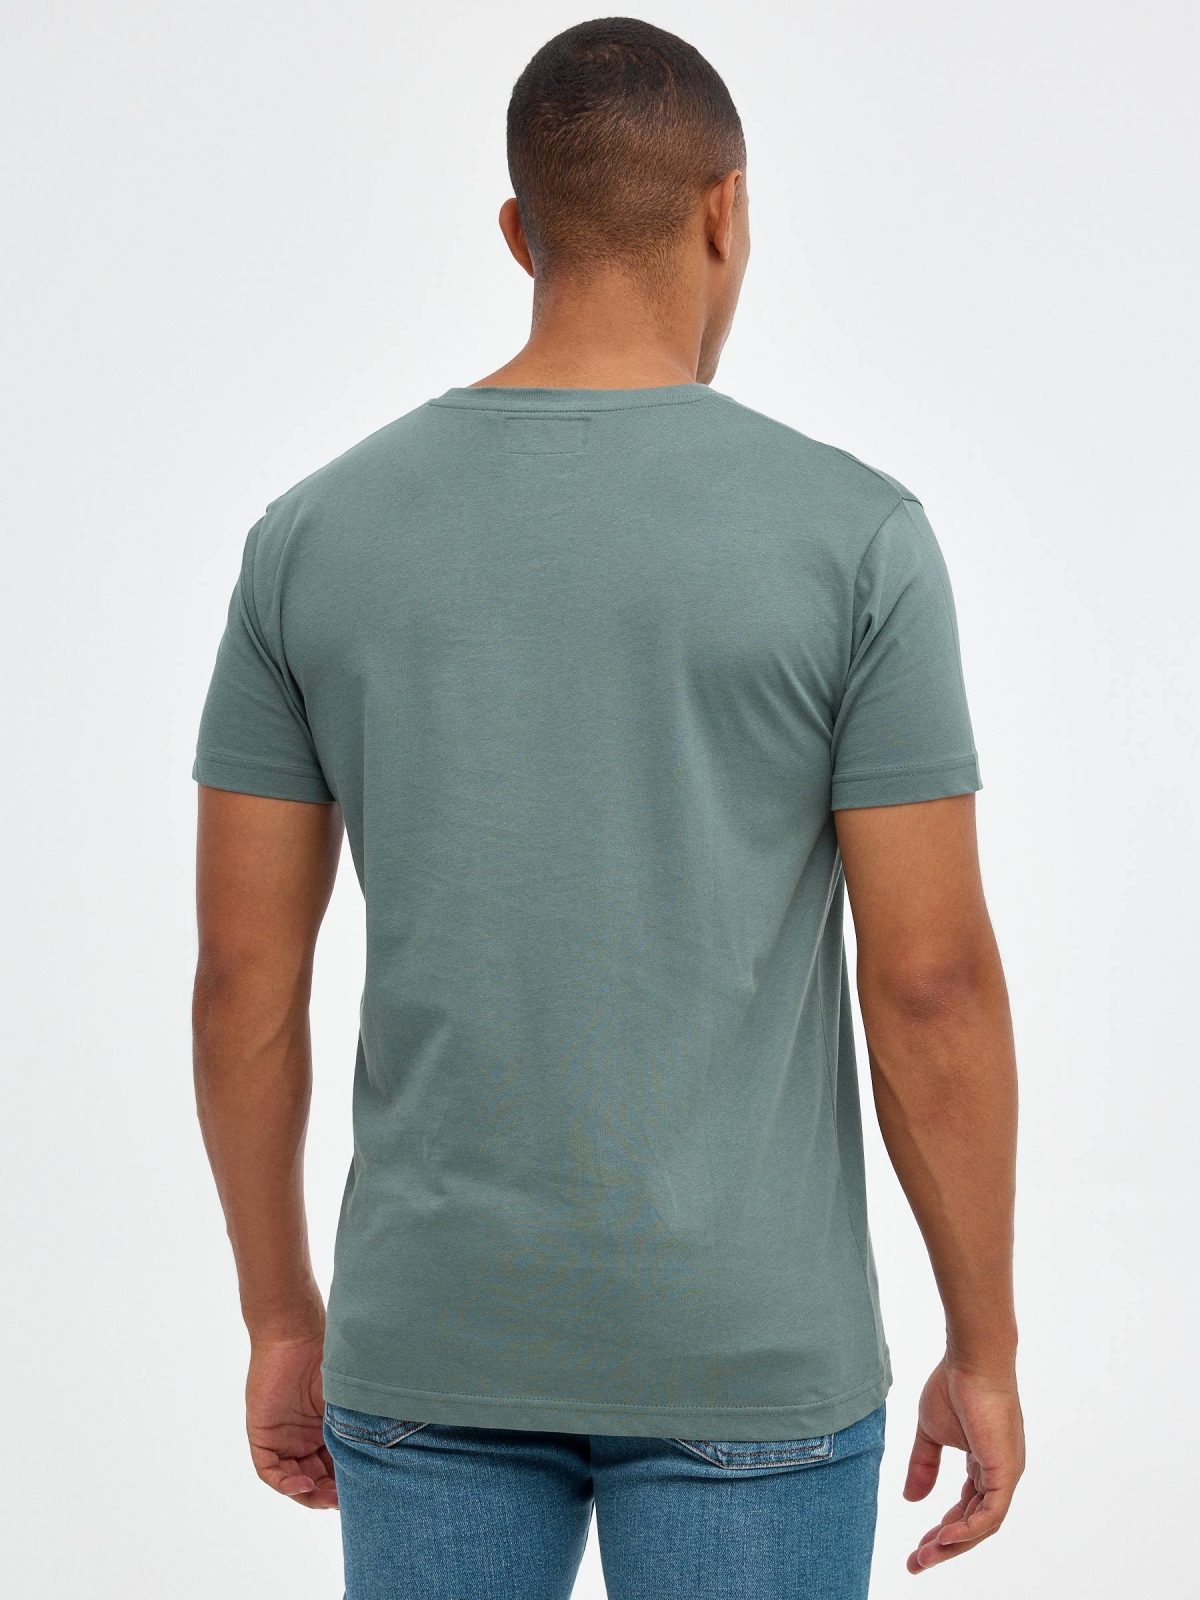 Be Green T-shirt greyish green middle back view